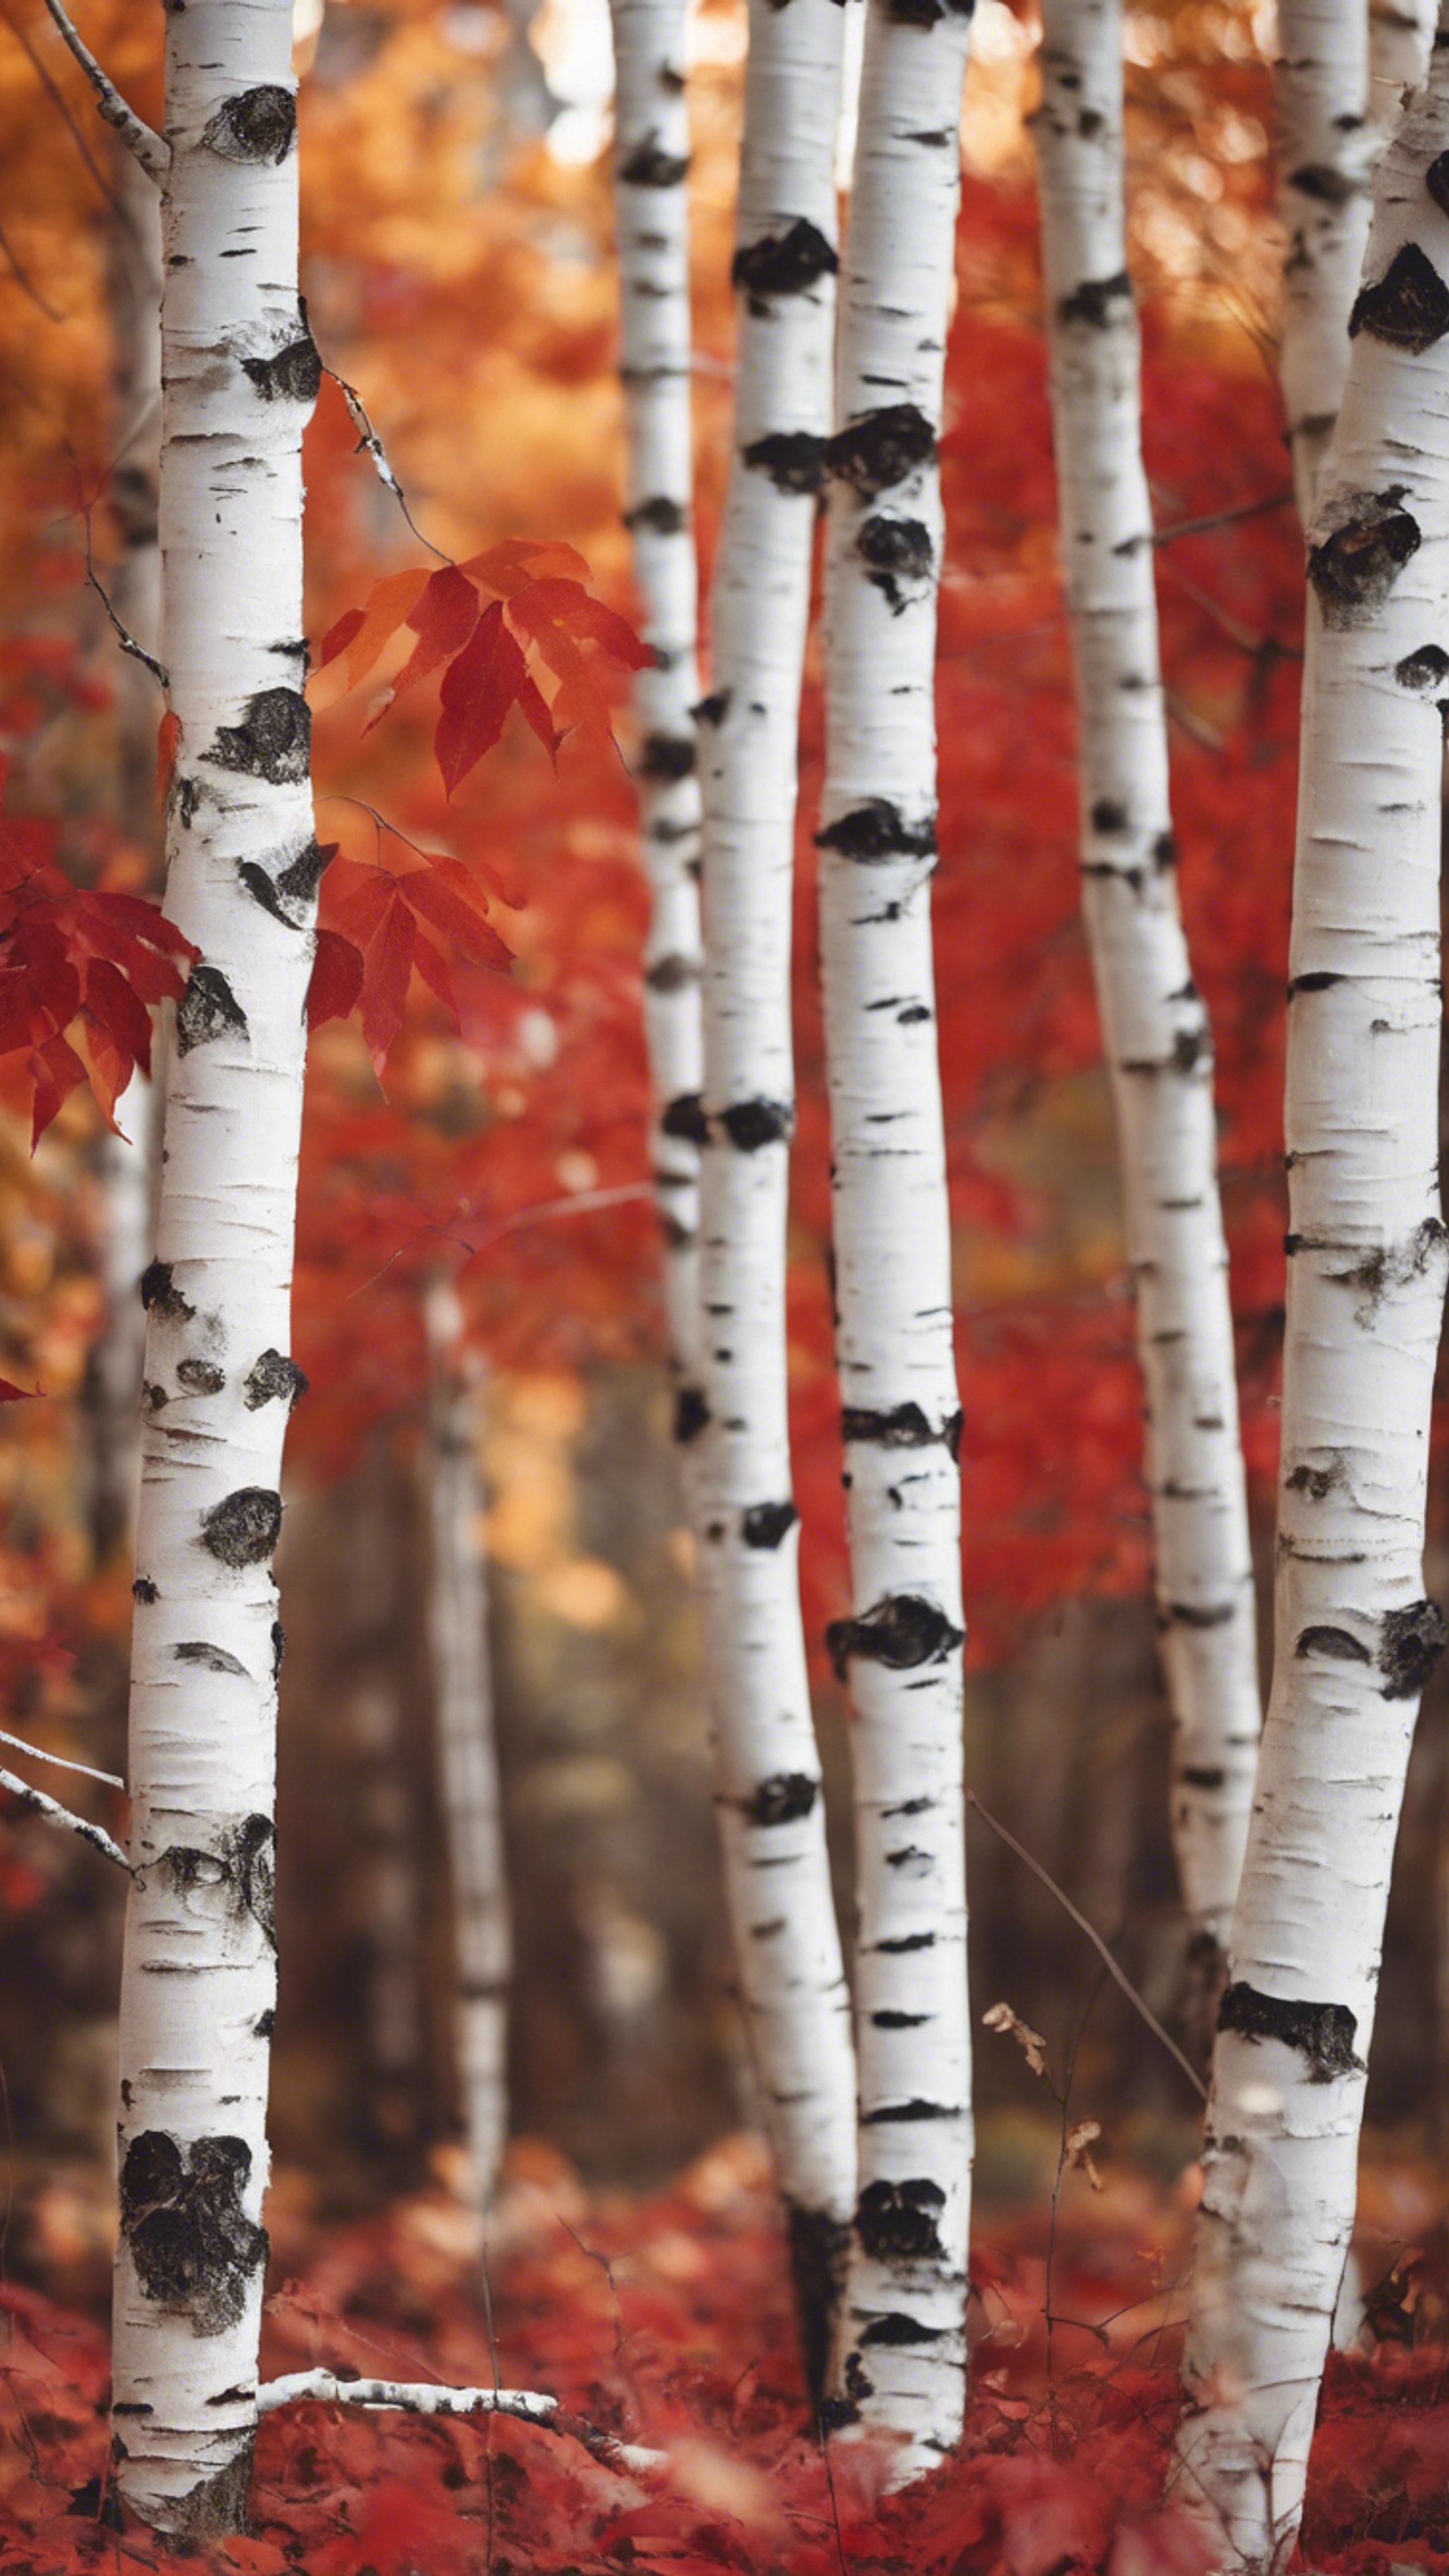 Fall scenes with white birches decked with autumn red foliage. Tapeta[2b263cdc55c54552b5f9]